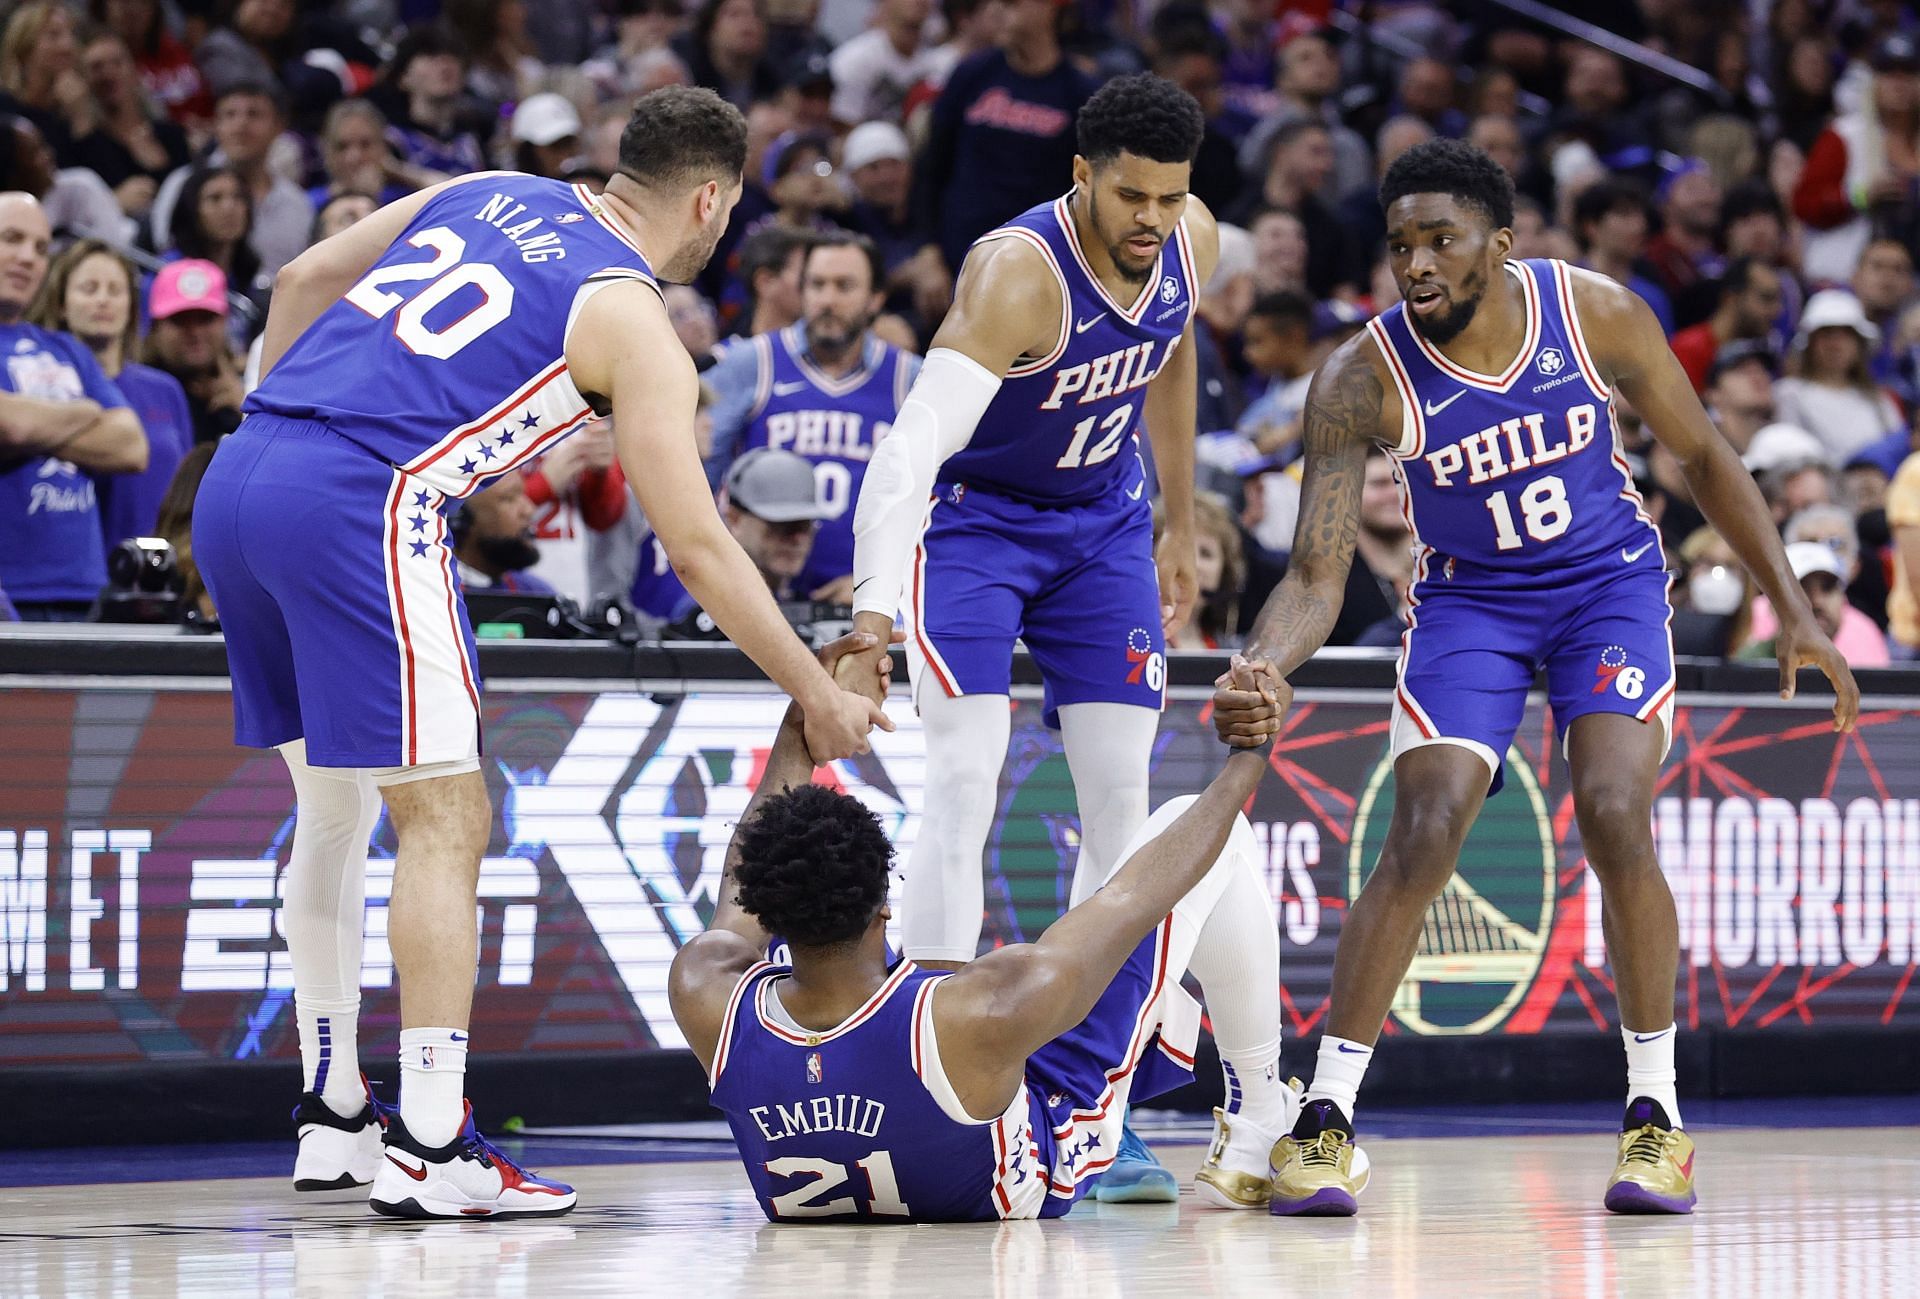 The Philadelphia 76ers will need to form a solid unit around Joel Embiid to contend for the NBA title next season